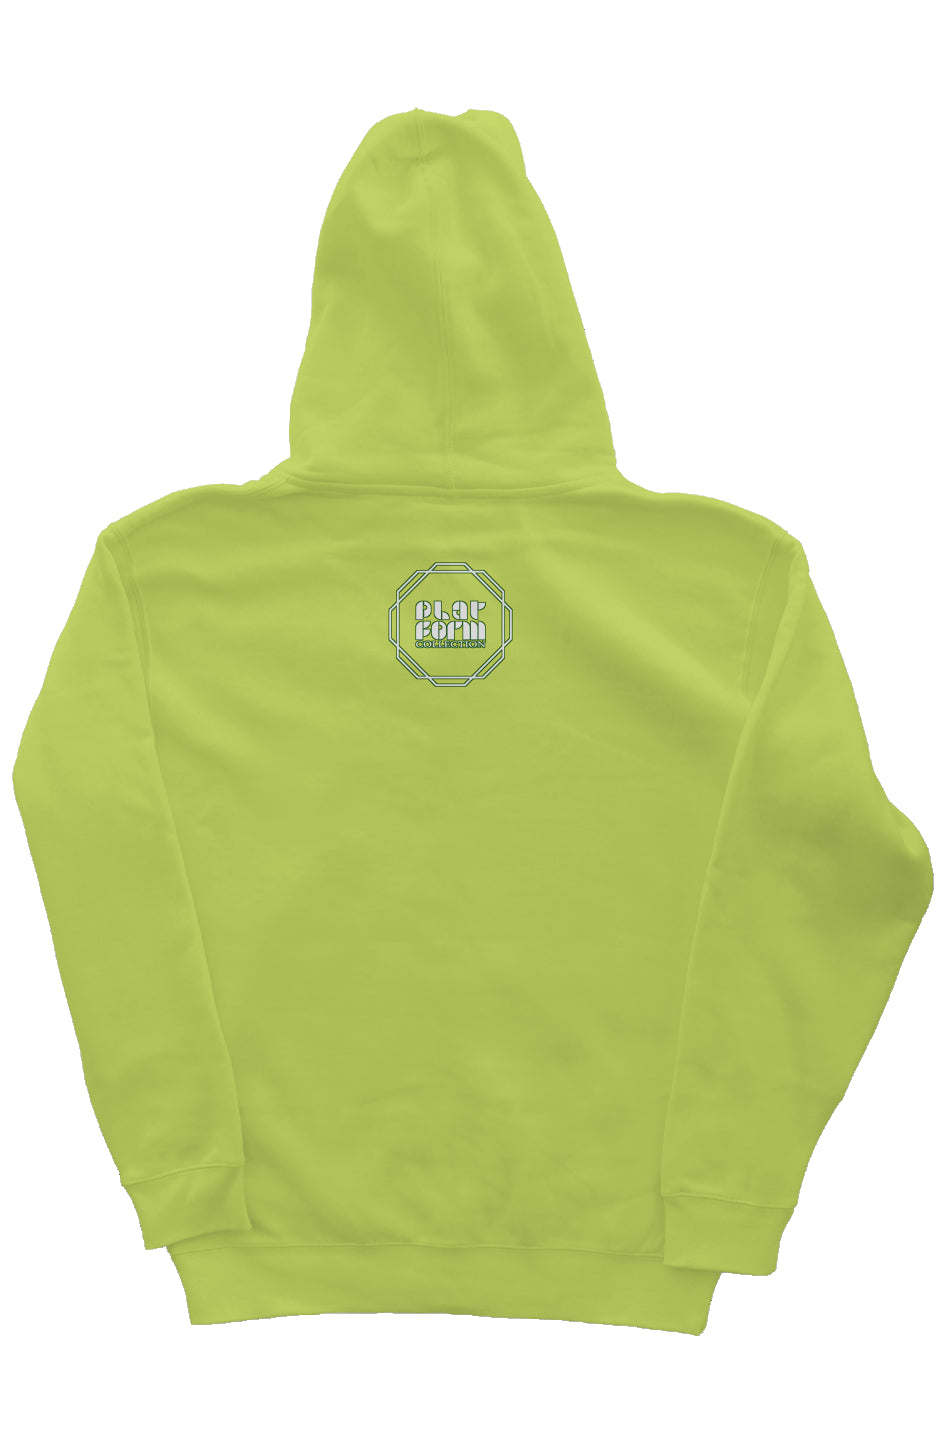 The Beat Block OG Hoodie- Safety 